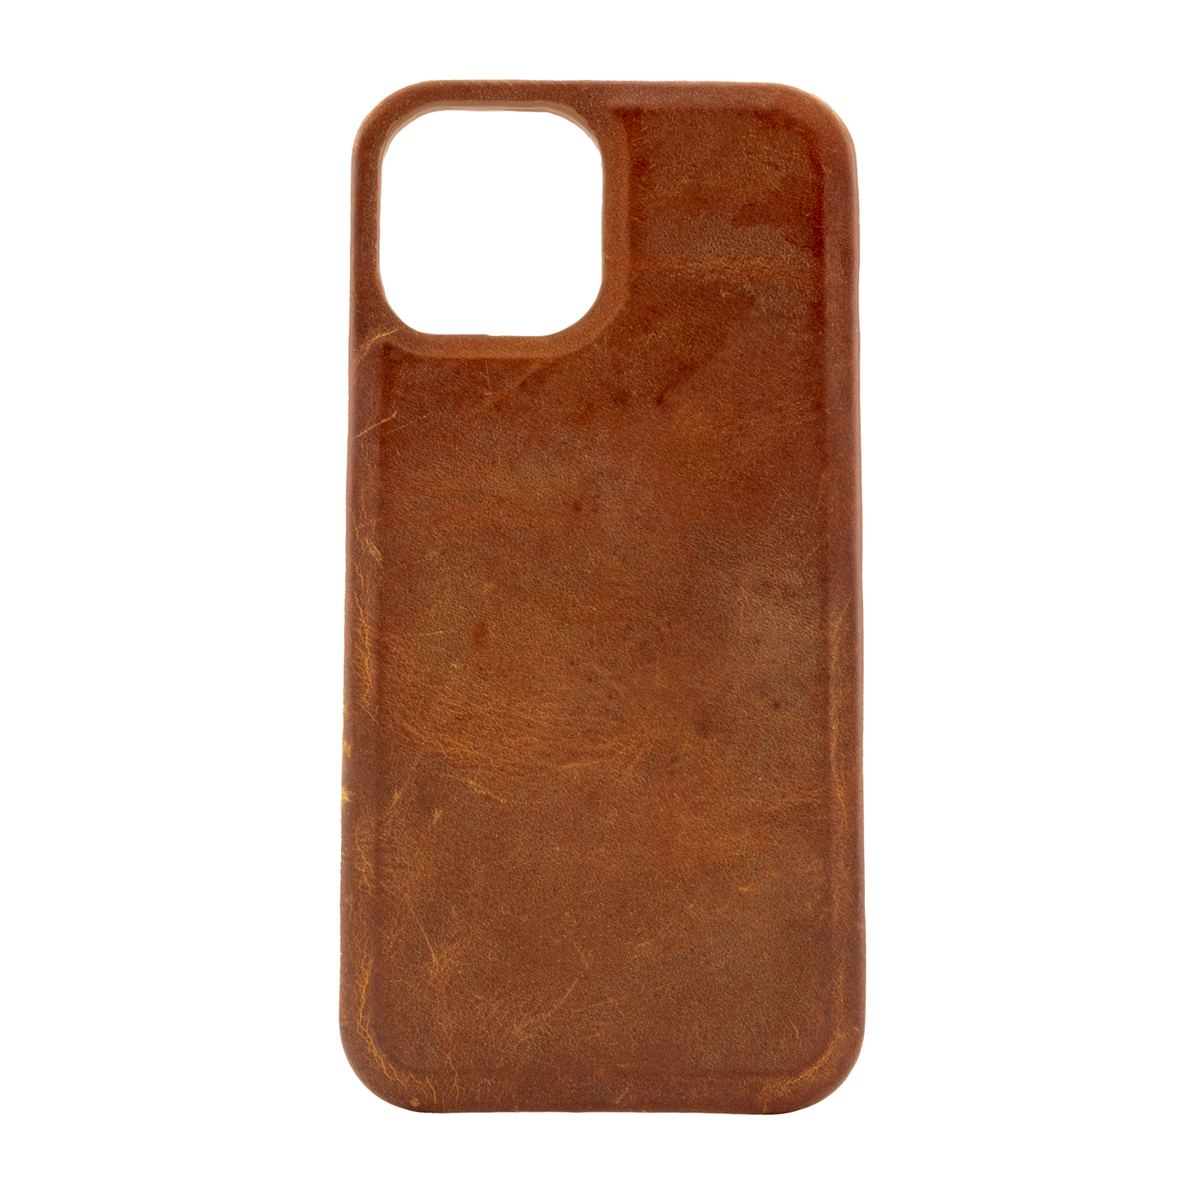 Galen Leather Co. Leather Hardback Case Iphone 12 Pro Max(6.7")- Crazy Horse Brown